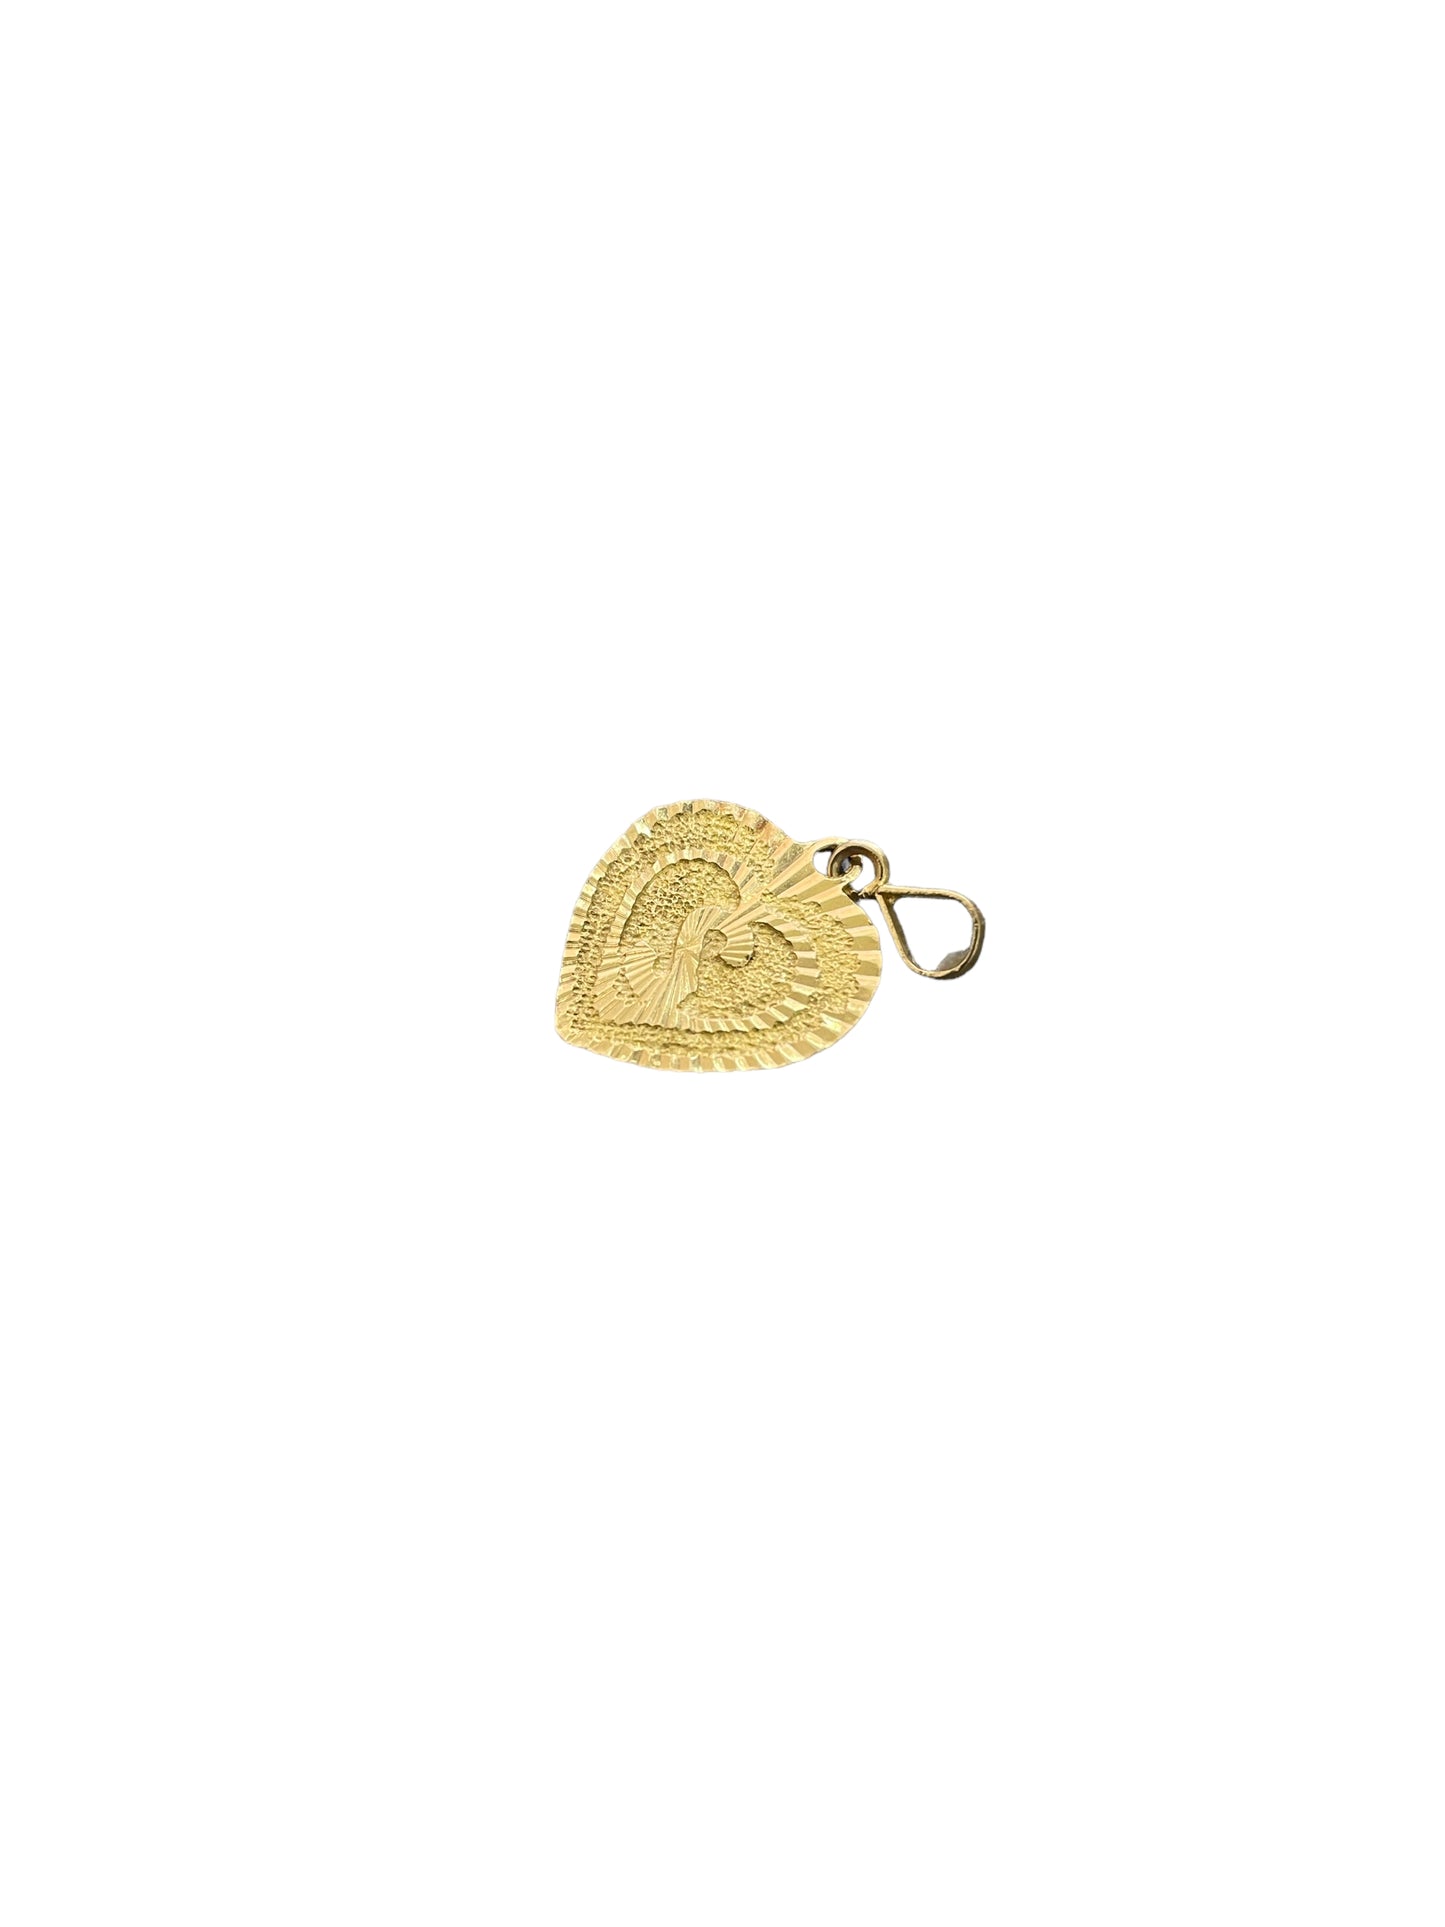 21K Yellow Gold Heart Shaped "S" Charm (1.2 Grams)